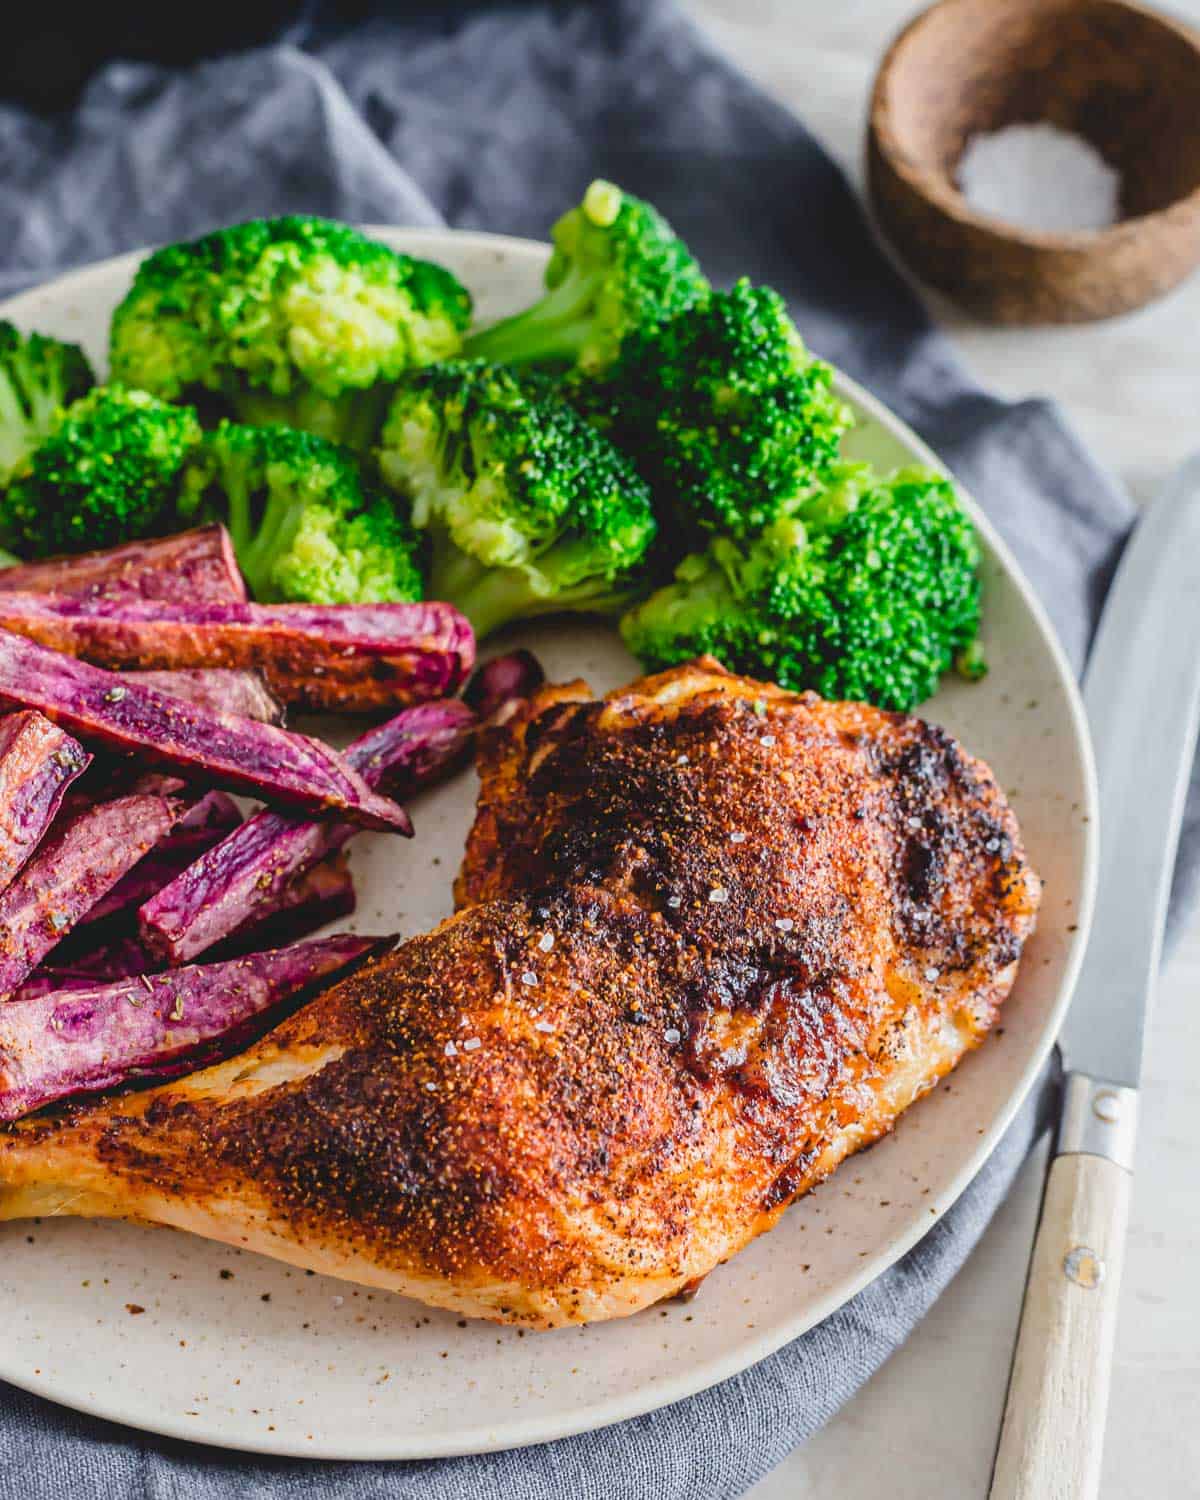 Spice rubbed air fryer chicken leg quarters on a plate with broccoli and purple sweet potato fries.